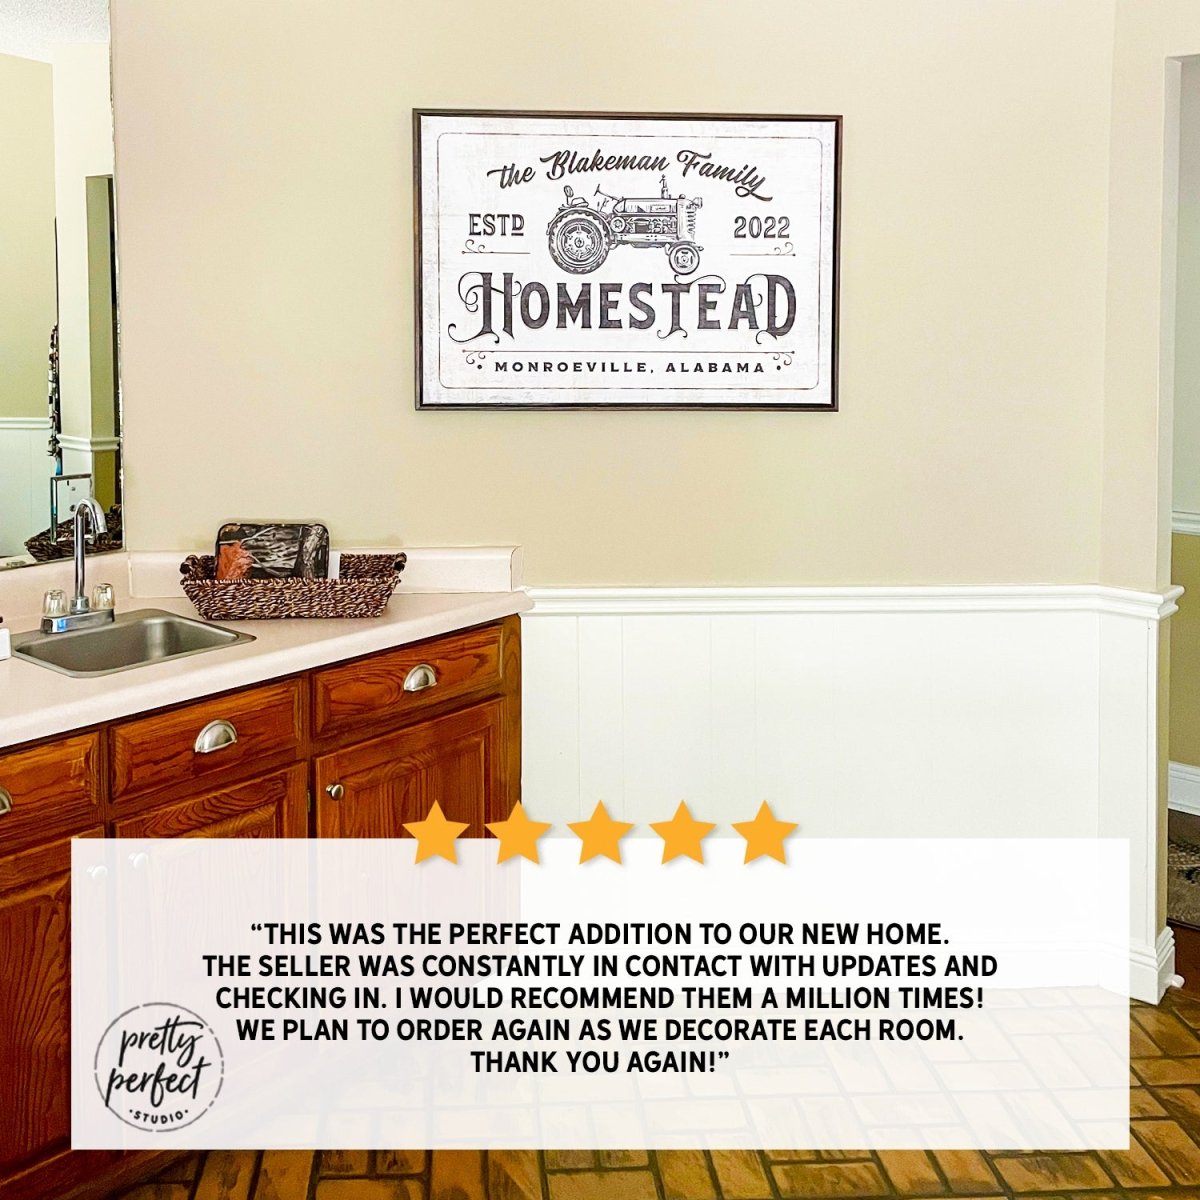 Customer product review for custom homestead wall art by Pretty Perfect Studio